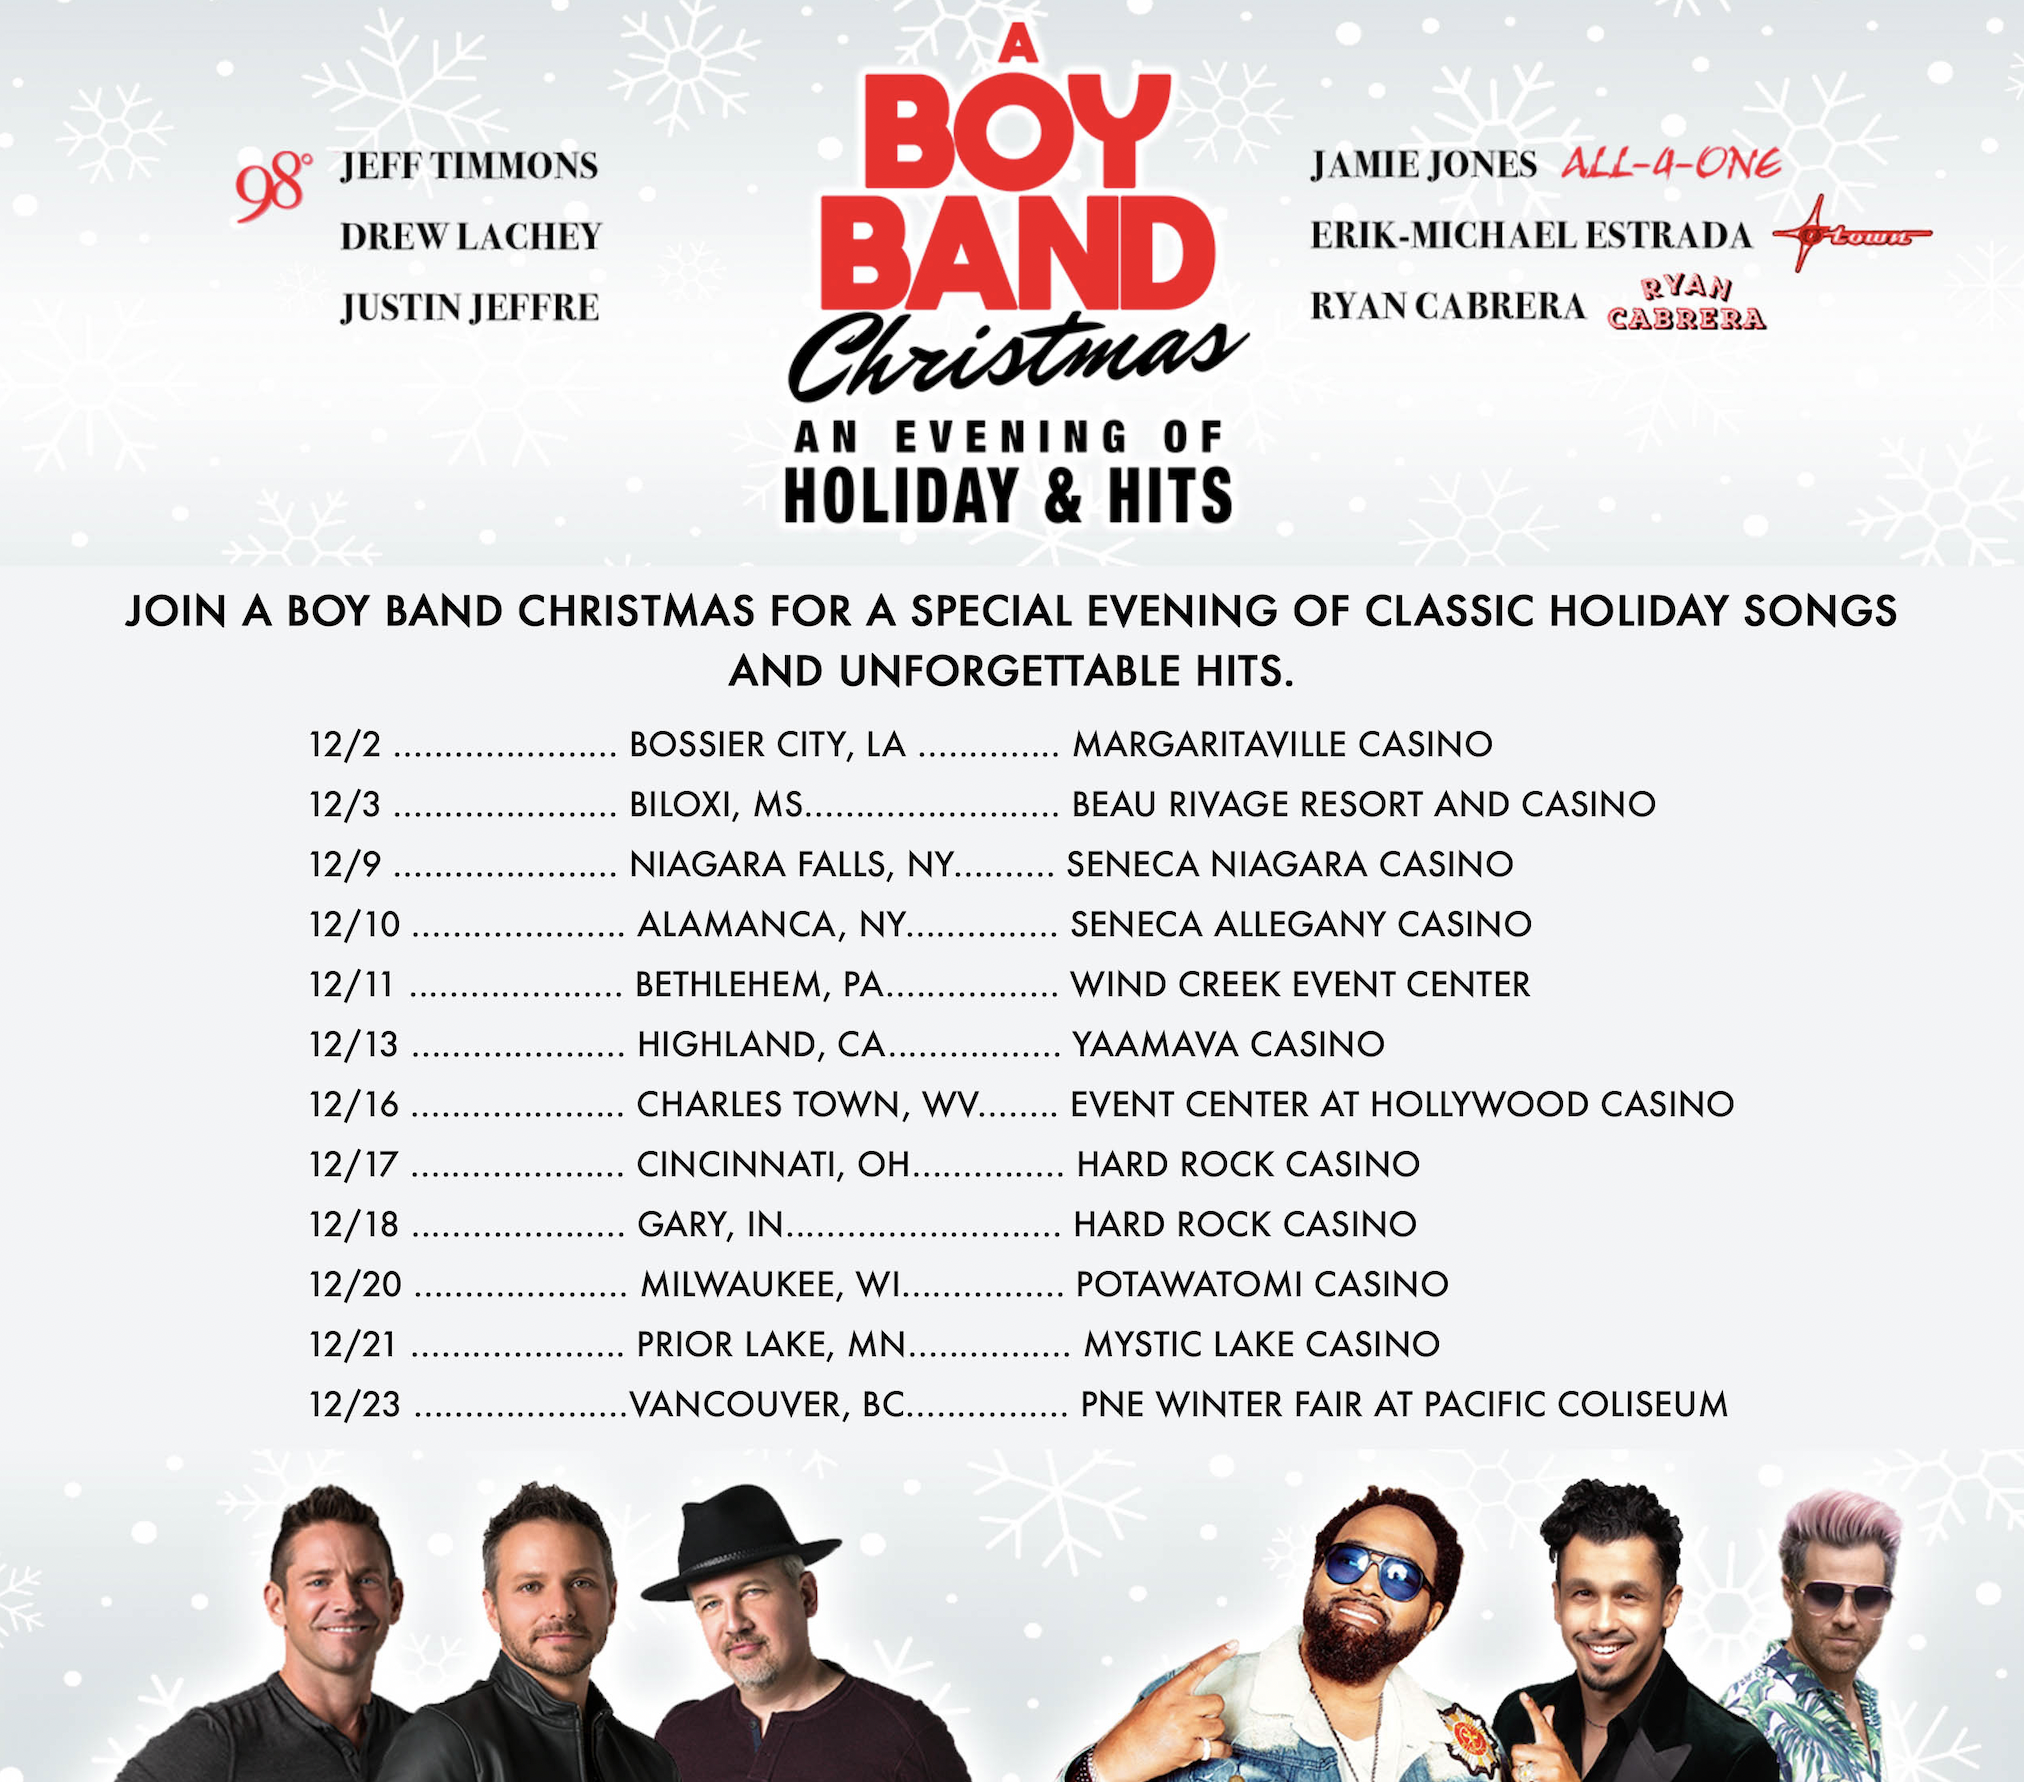 A Boy Band Christmas Featuring 98 Degrees, All-4-One, and O-Town